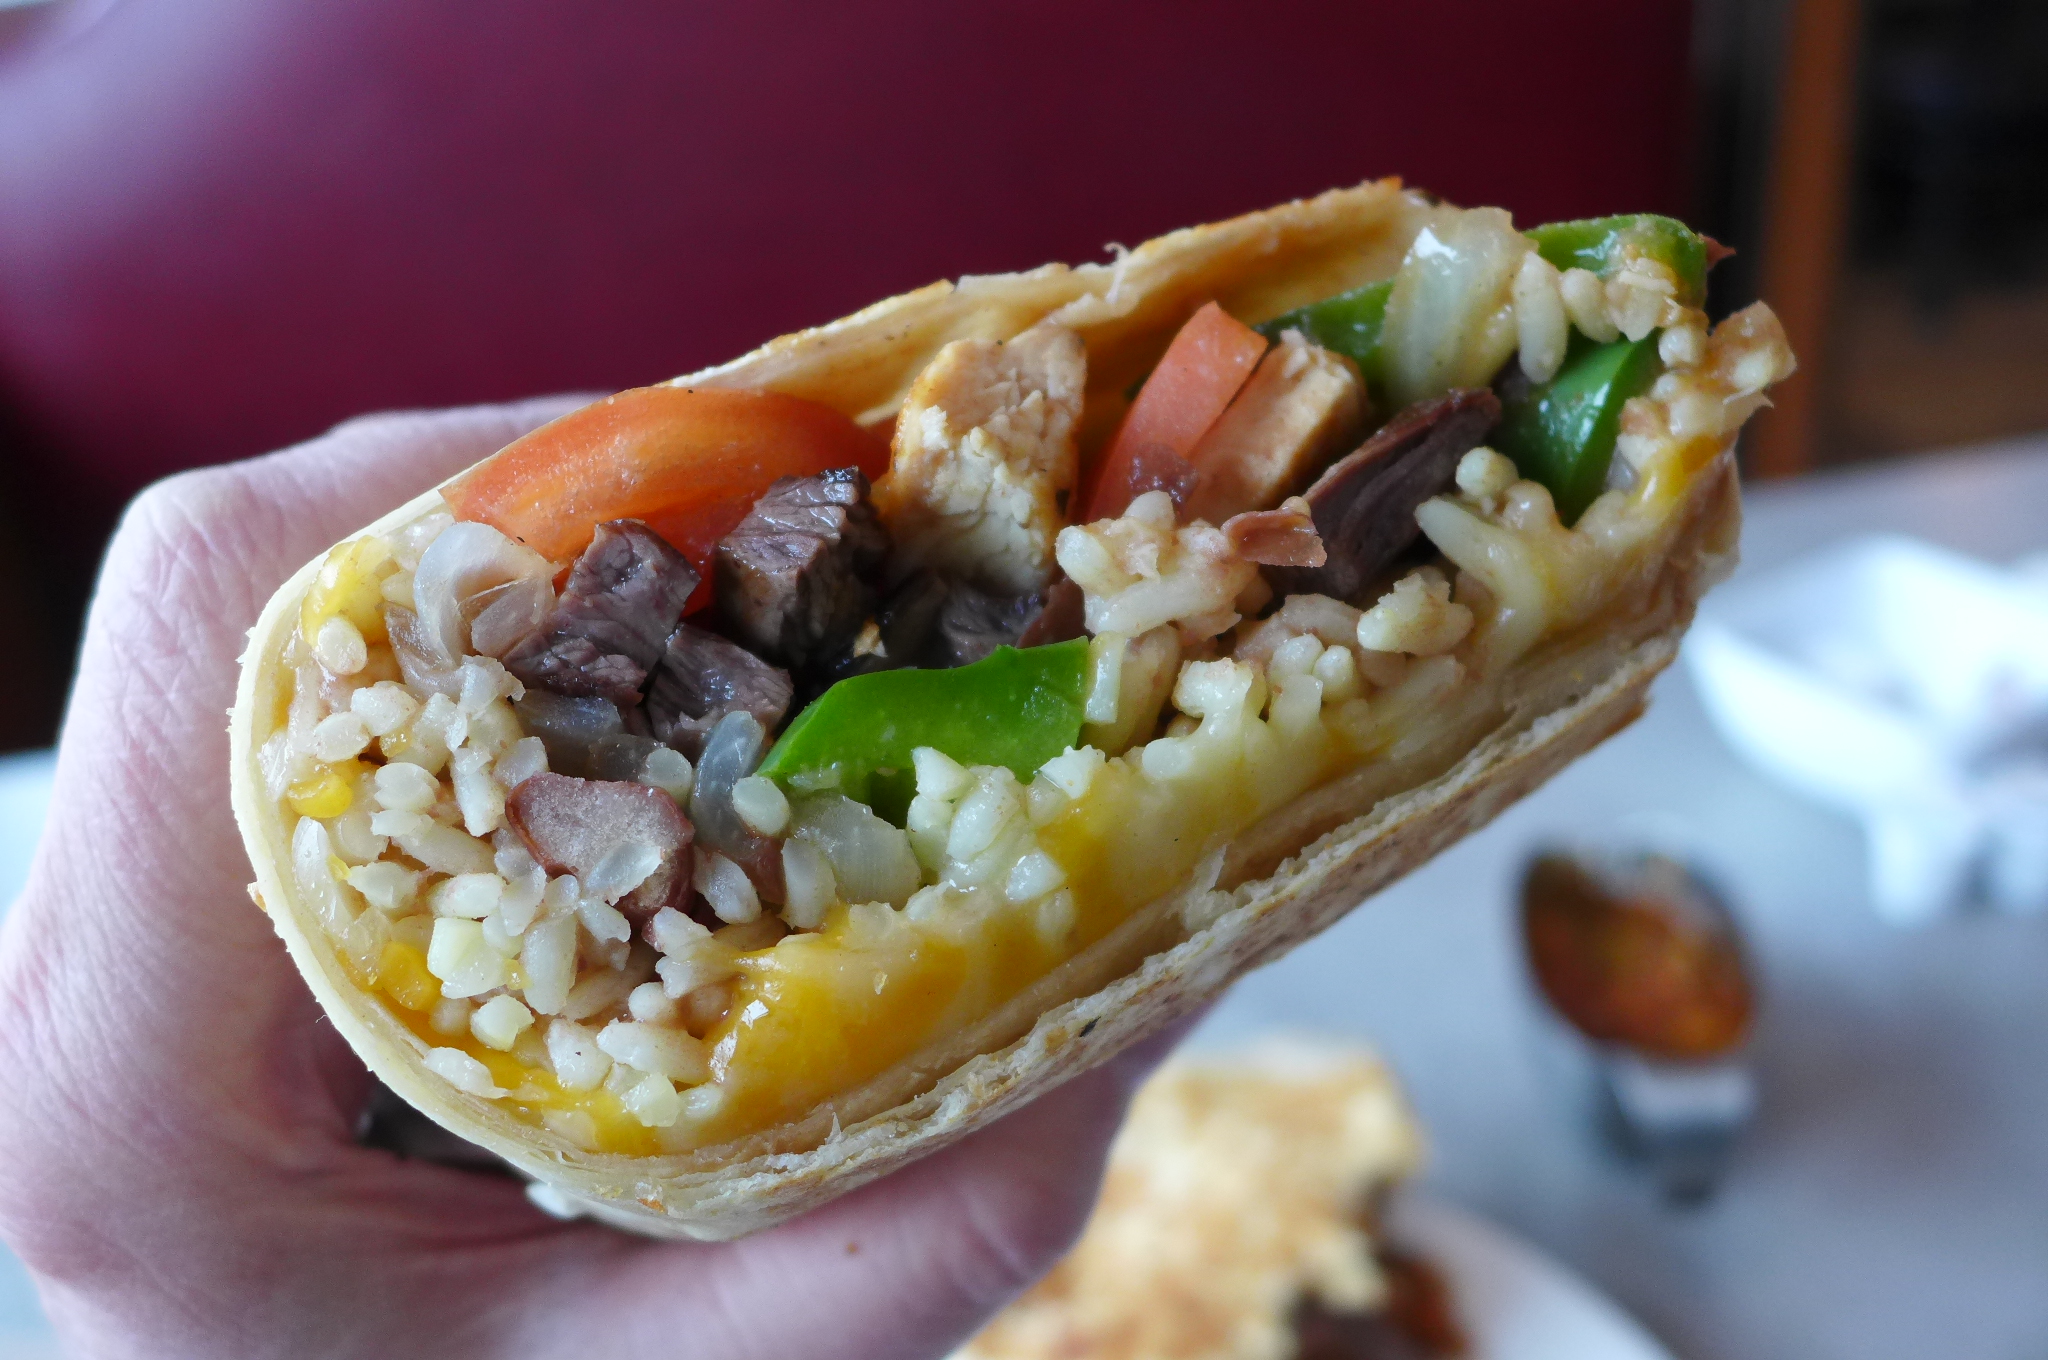 A burrito seen in cross section being held up by a hand.